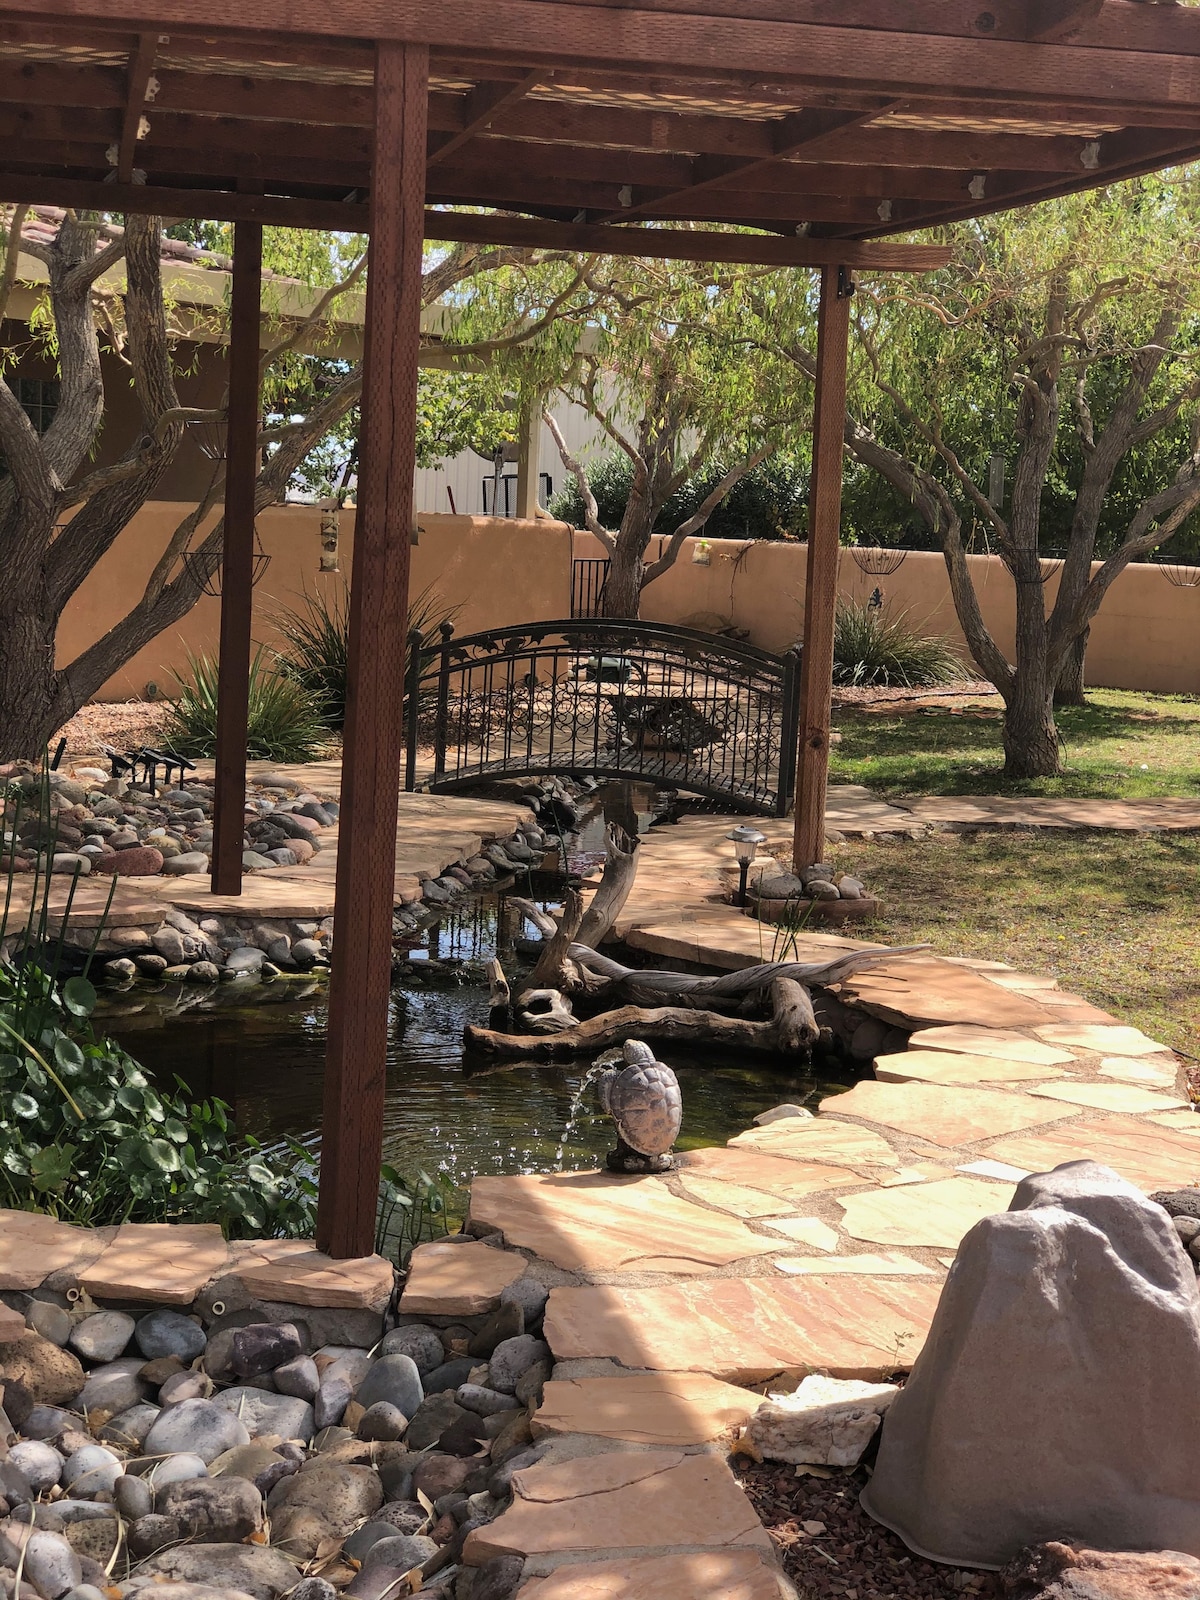 Cochise Stronghold Airb&b